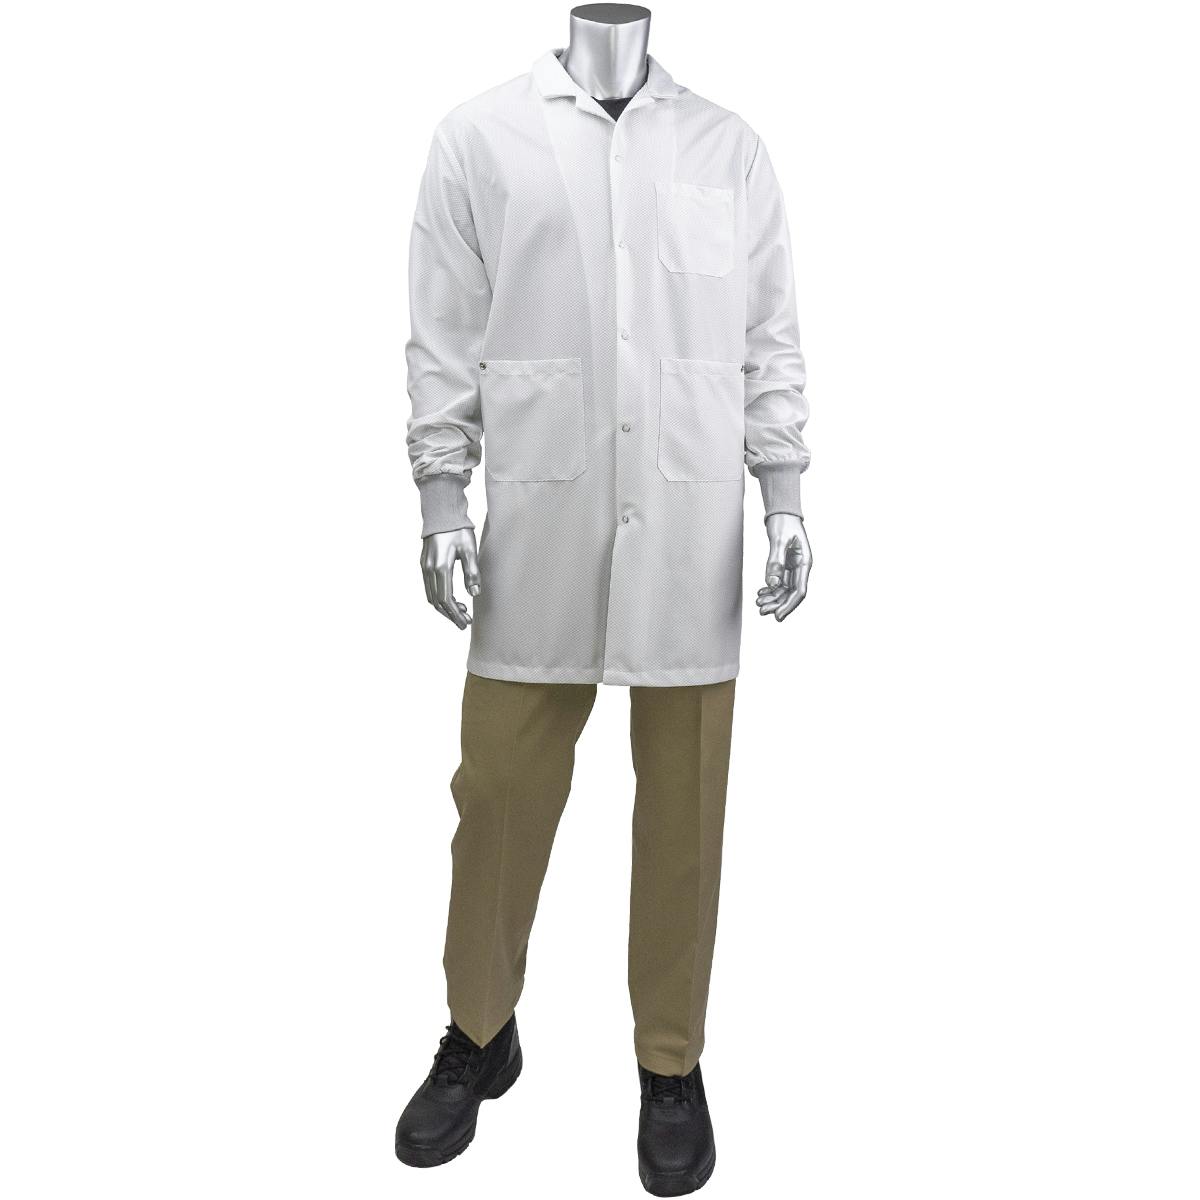 StatMaster Long ESD Labcoat - ESD Knit Cuff, White (BR51C-47WH)_0